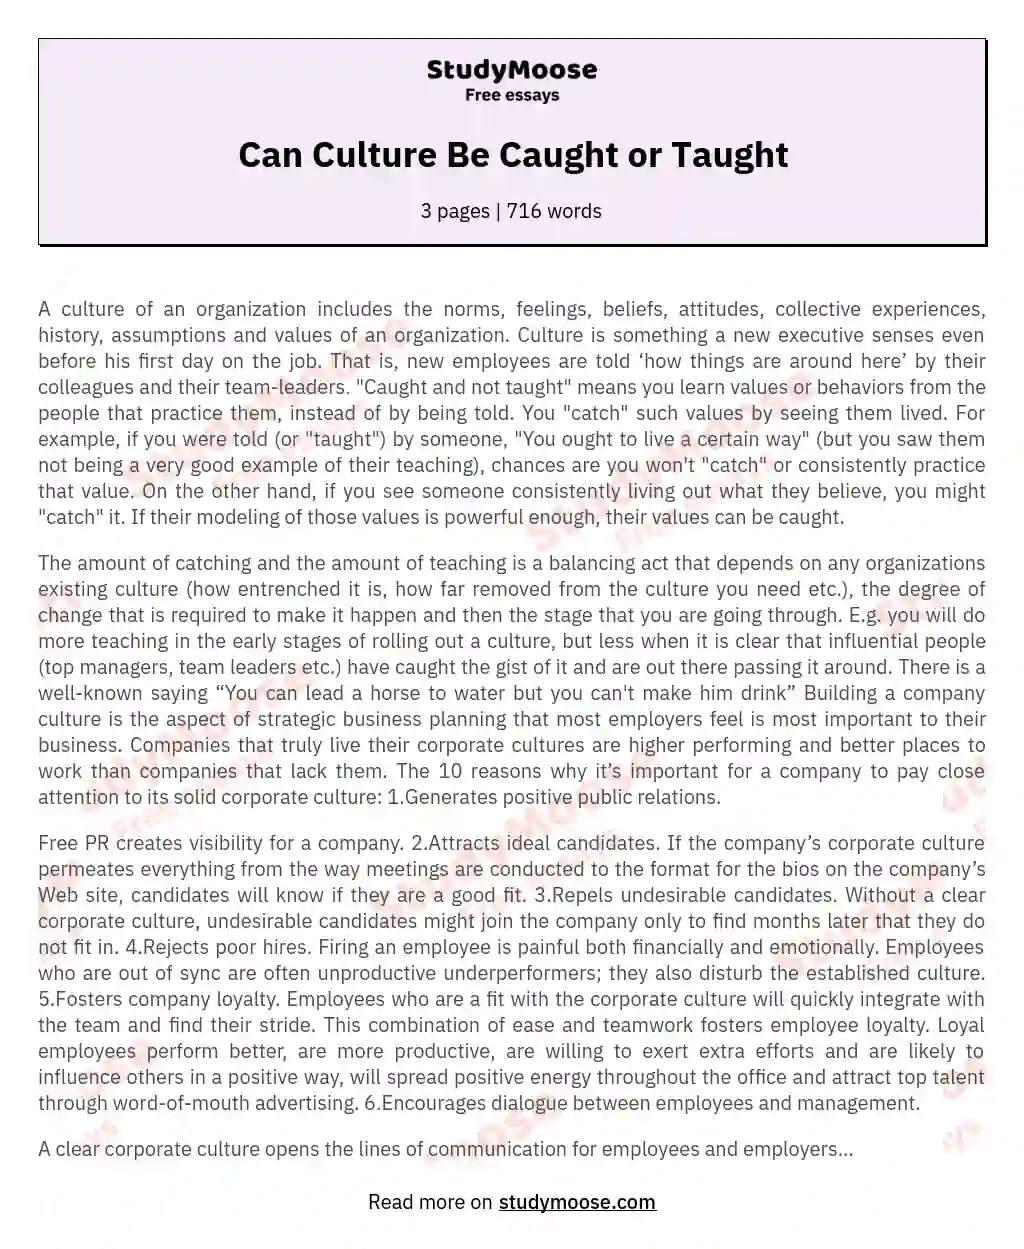 Can Culture Be Caught or Taught